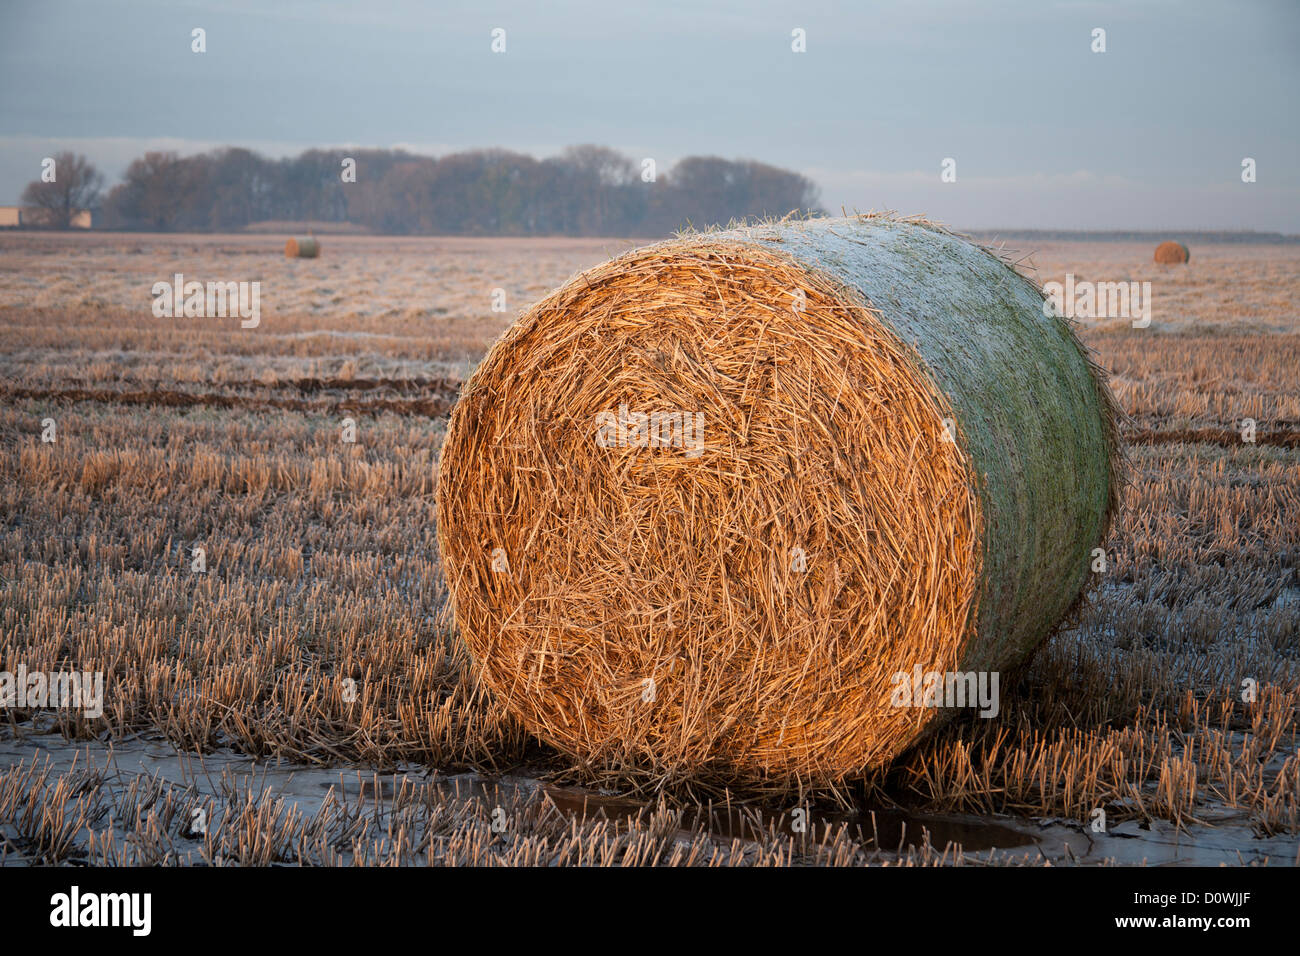 Cut bales of hay in a field in Lancashire   Straw bales in winter for use as bedding. Stock Photo